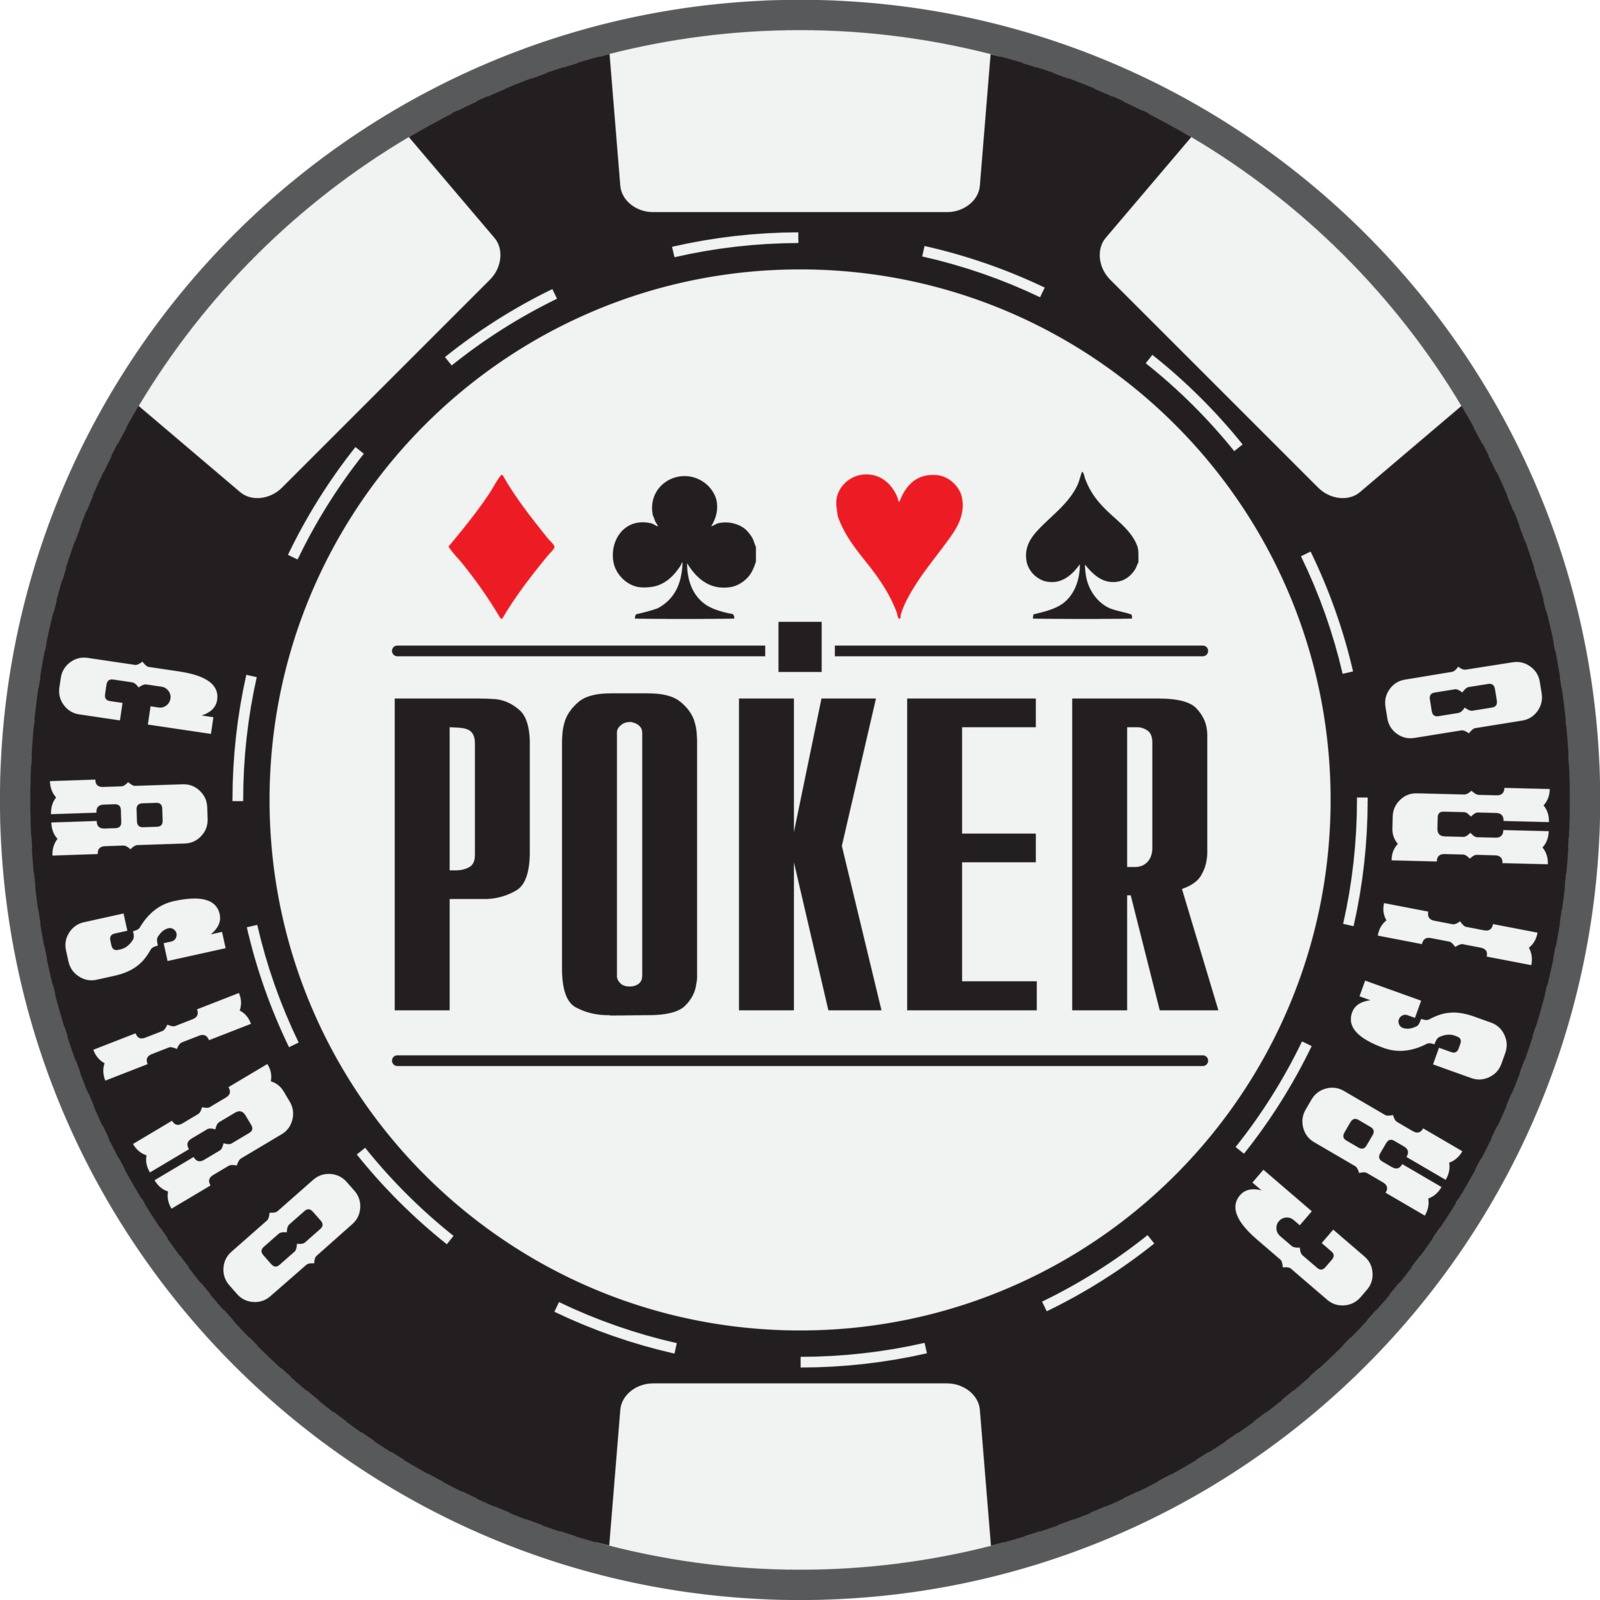 Black casino chips with text Poker. Vector illustration.